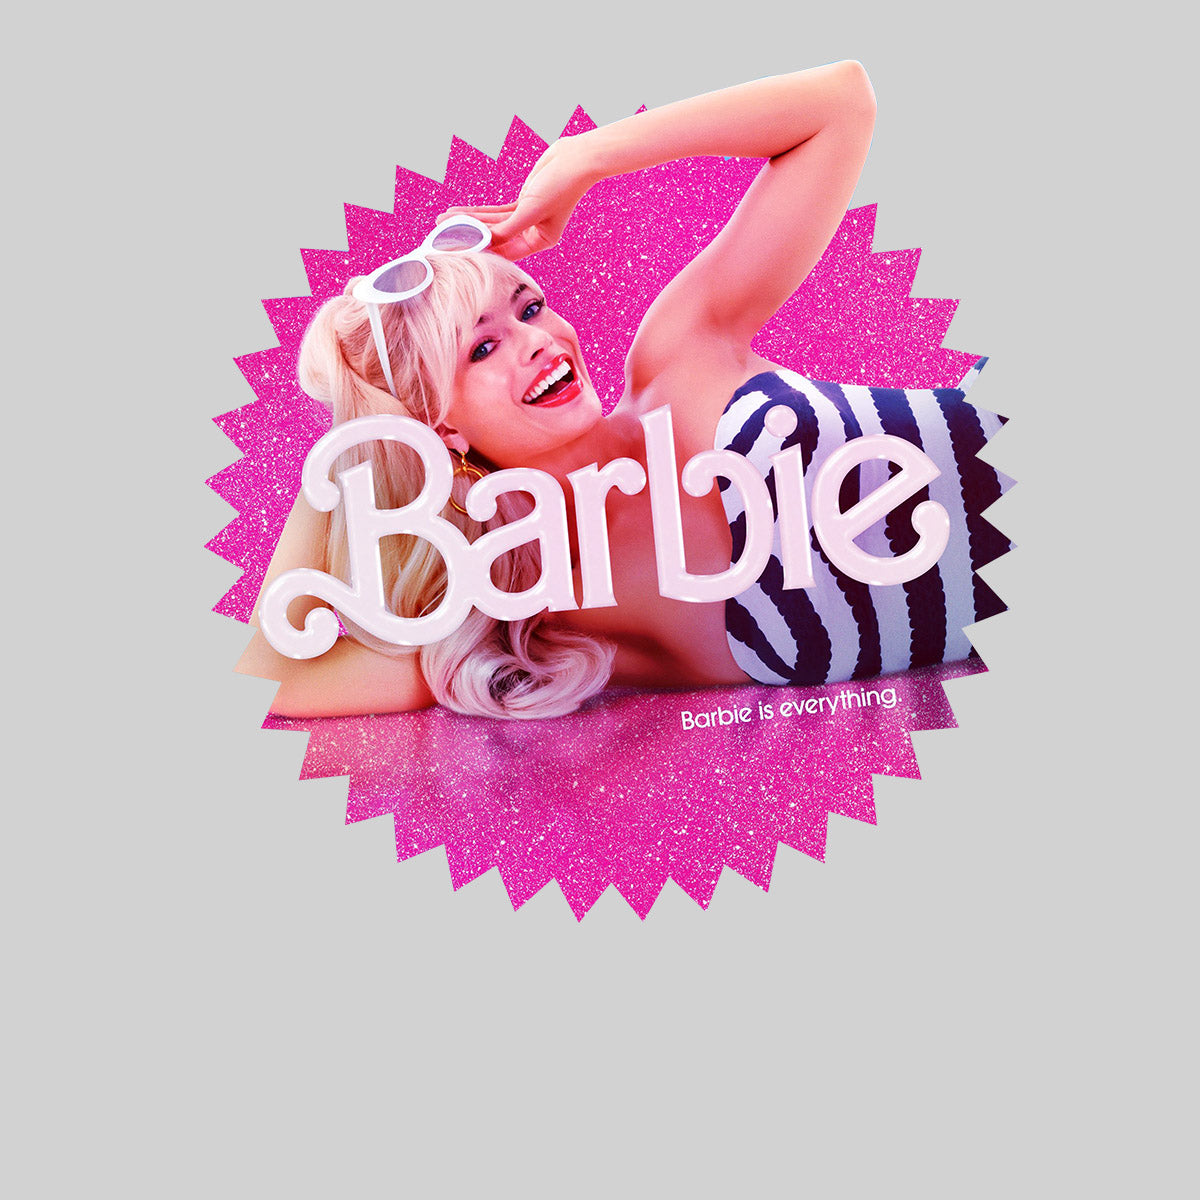 Barbie Movie T-Shirt for adults Margot Robbie Inspired Design